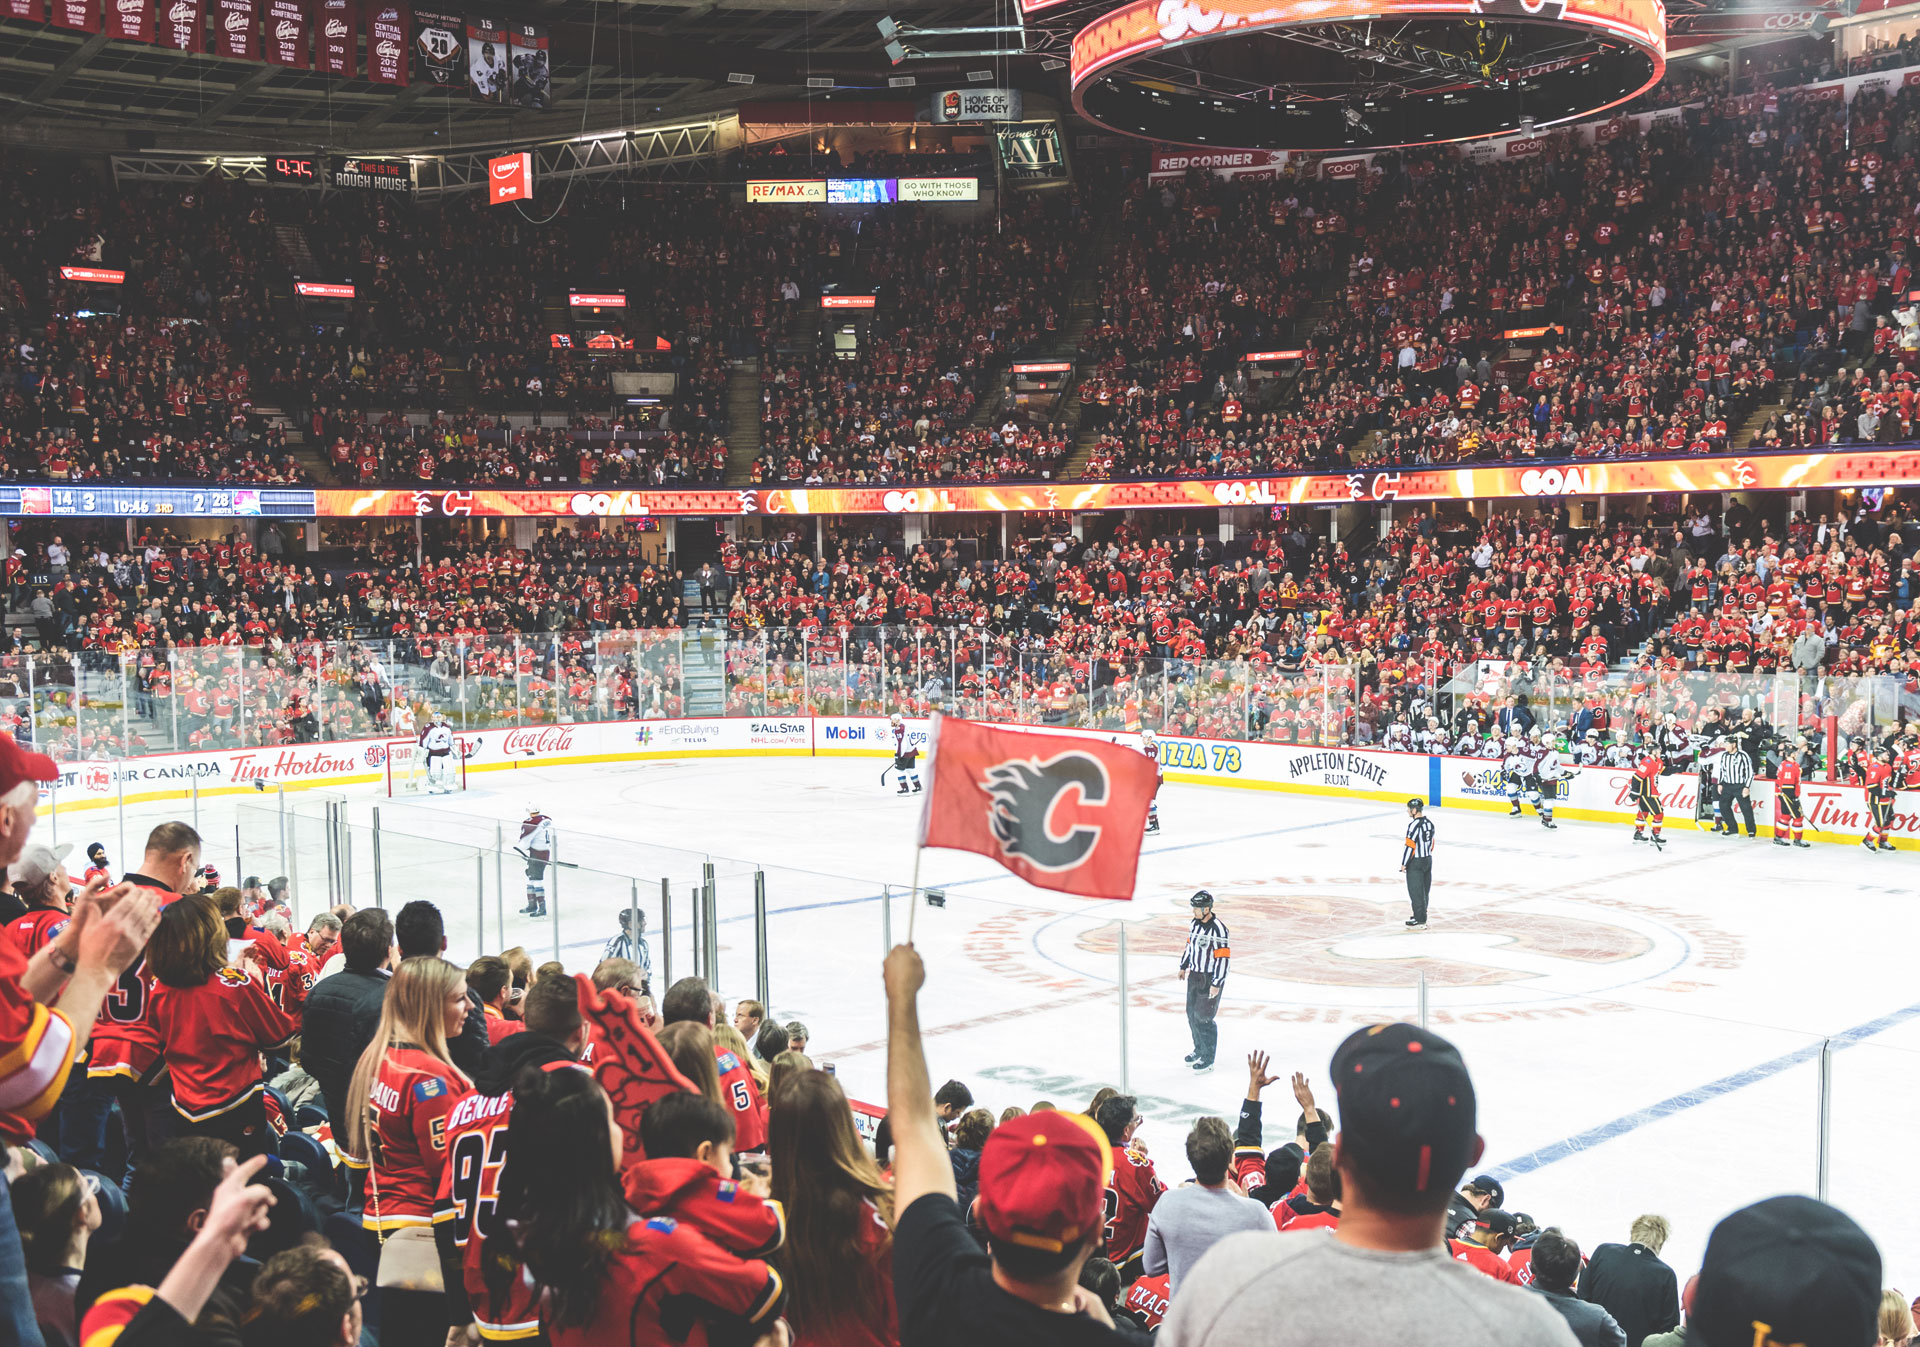 Wide shot of fans celebrating a goal at the Calgary Flames game